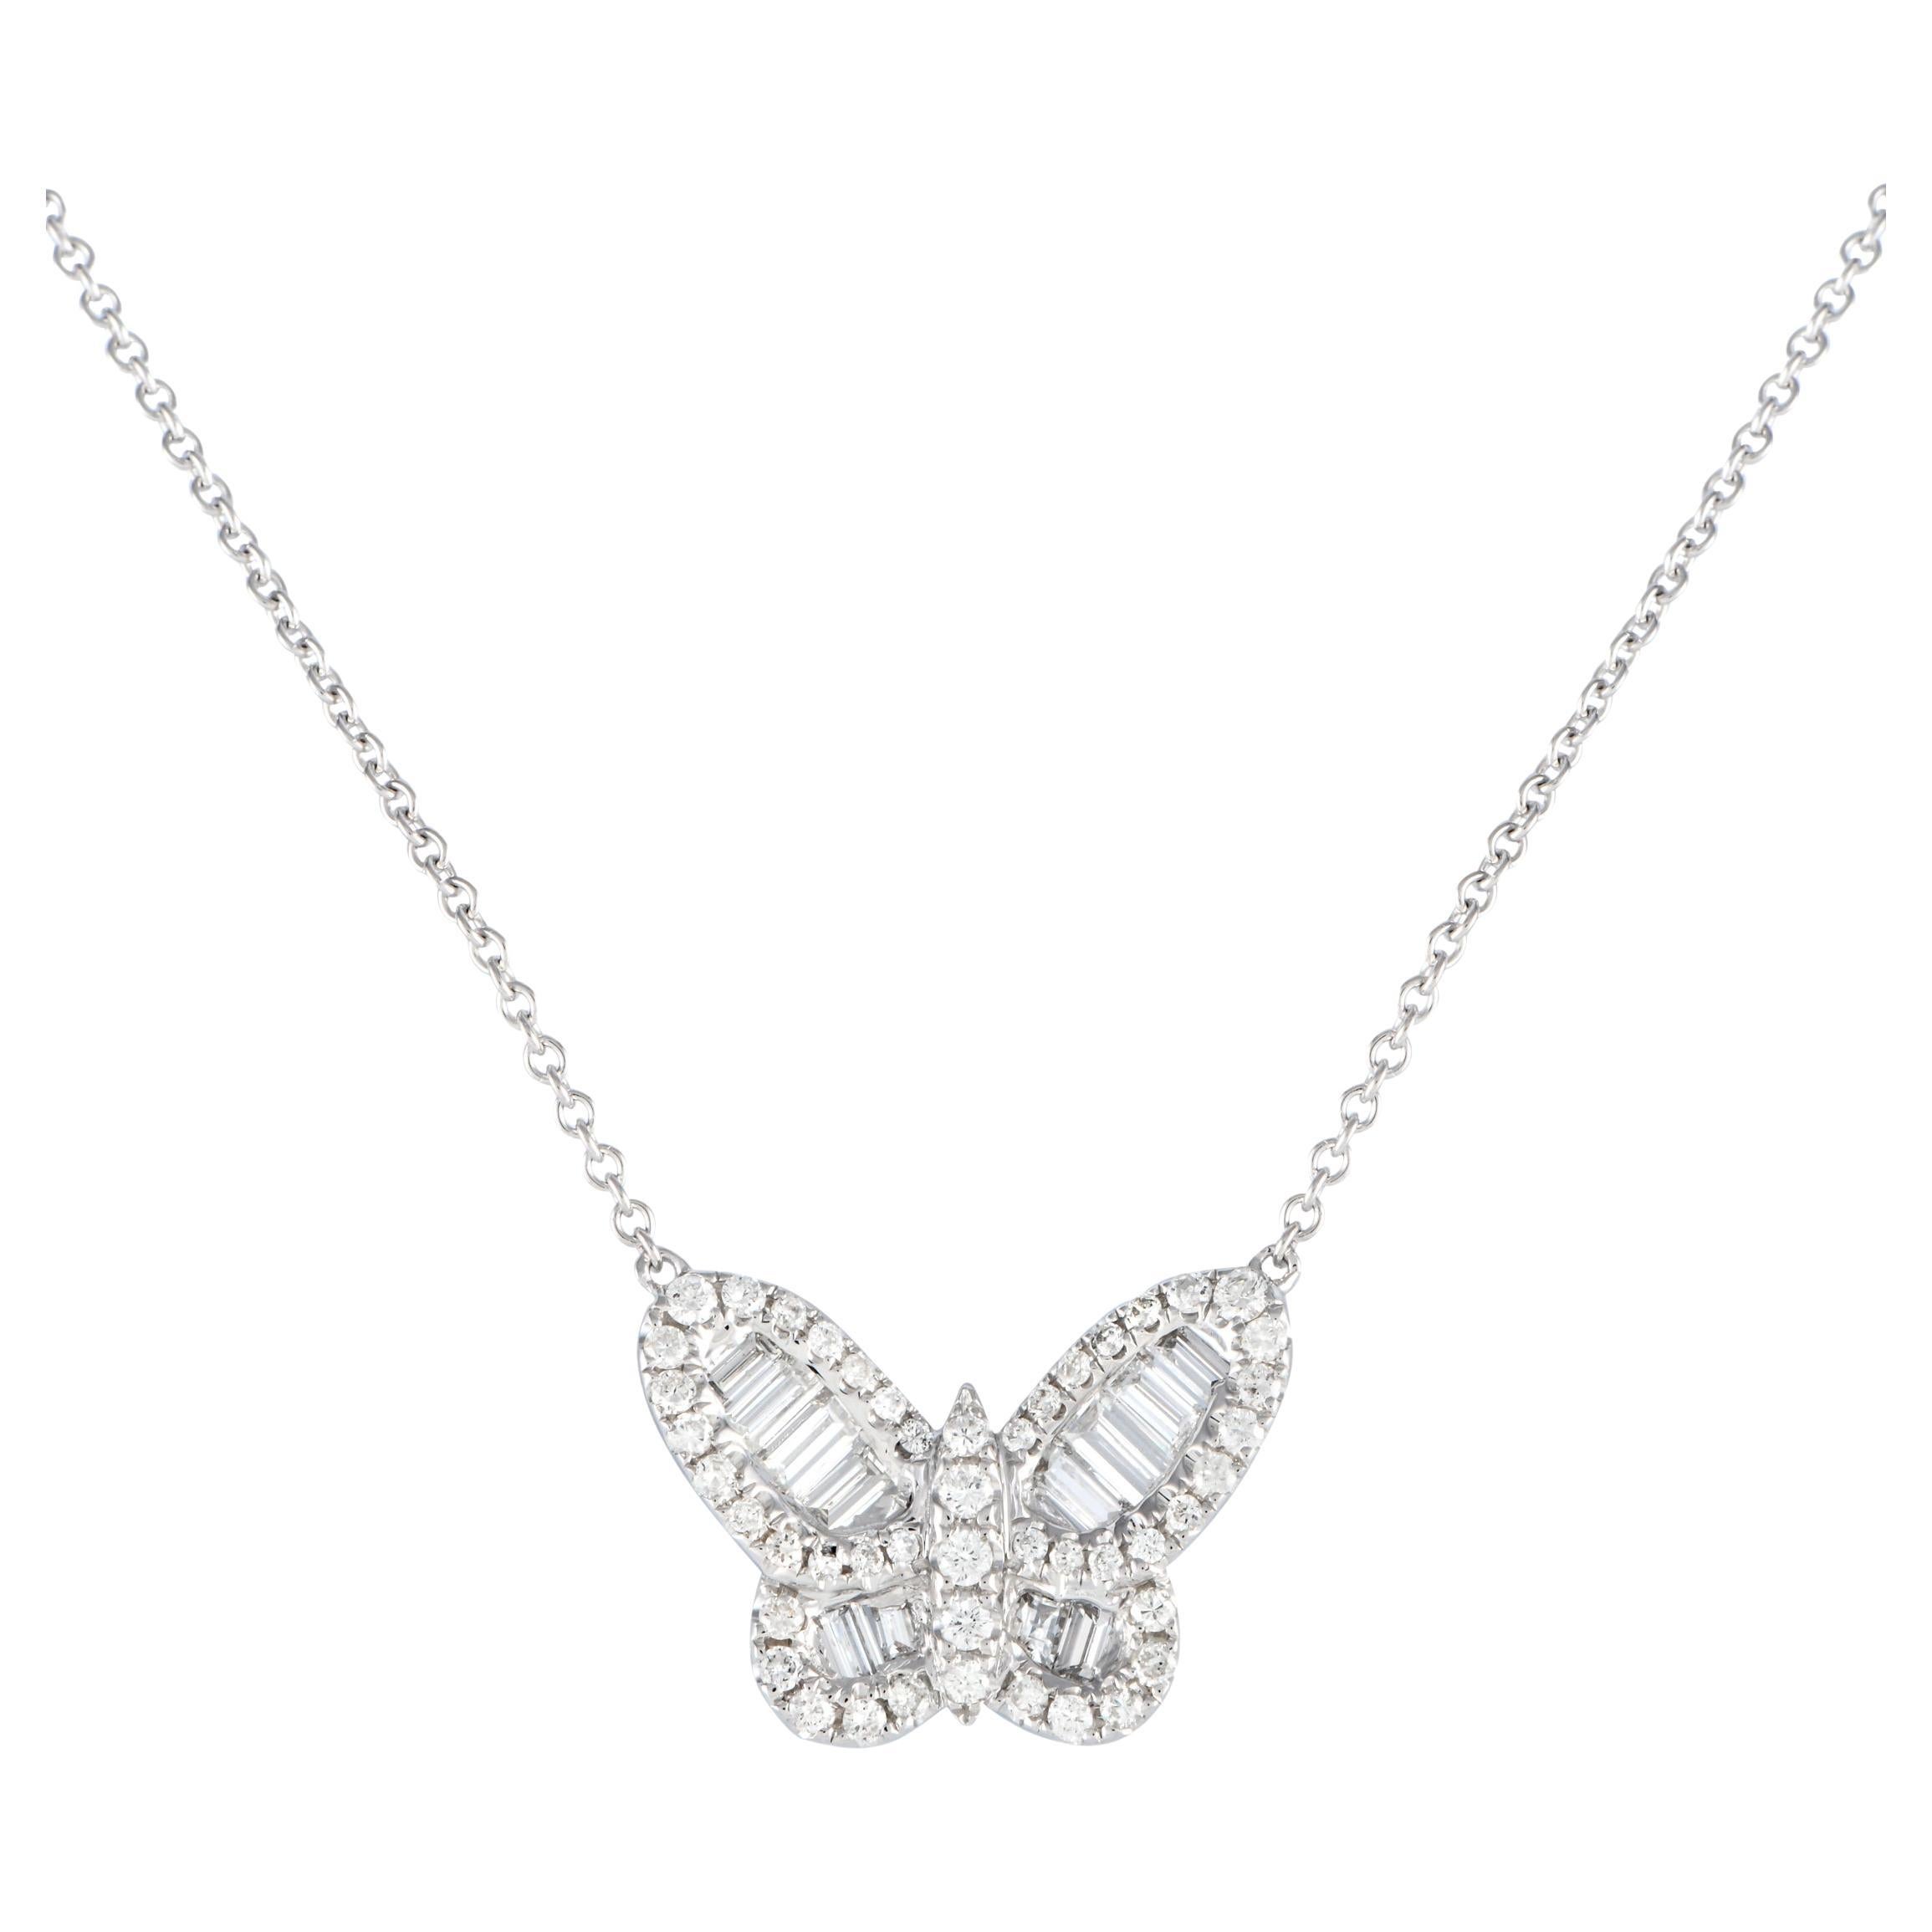 LB Exclusive 18K White Gold 1.12ct Diamond Butterfly Necklace For Sale